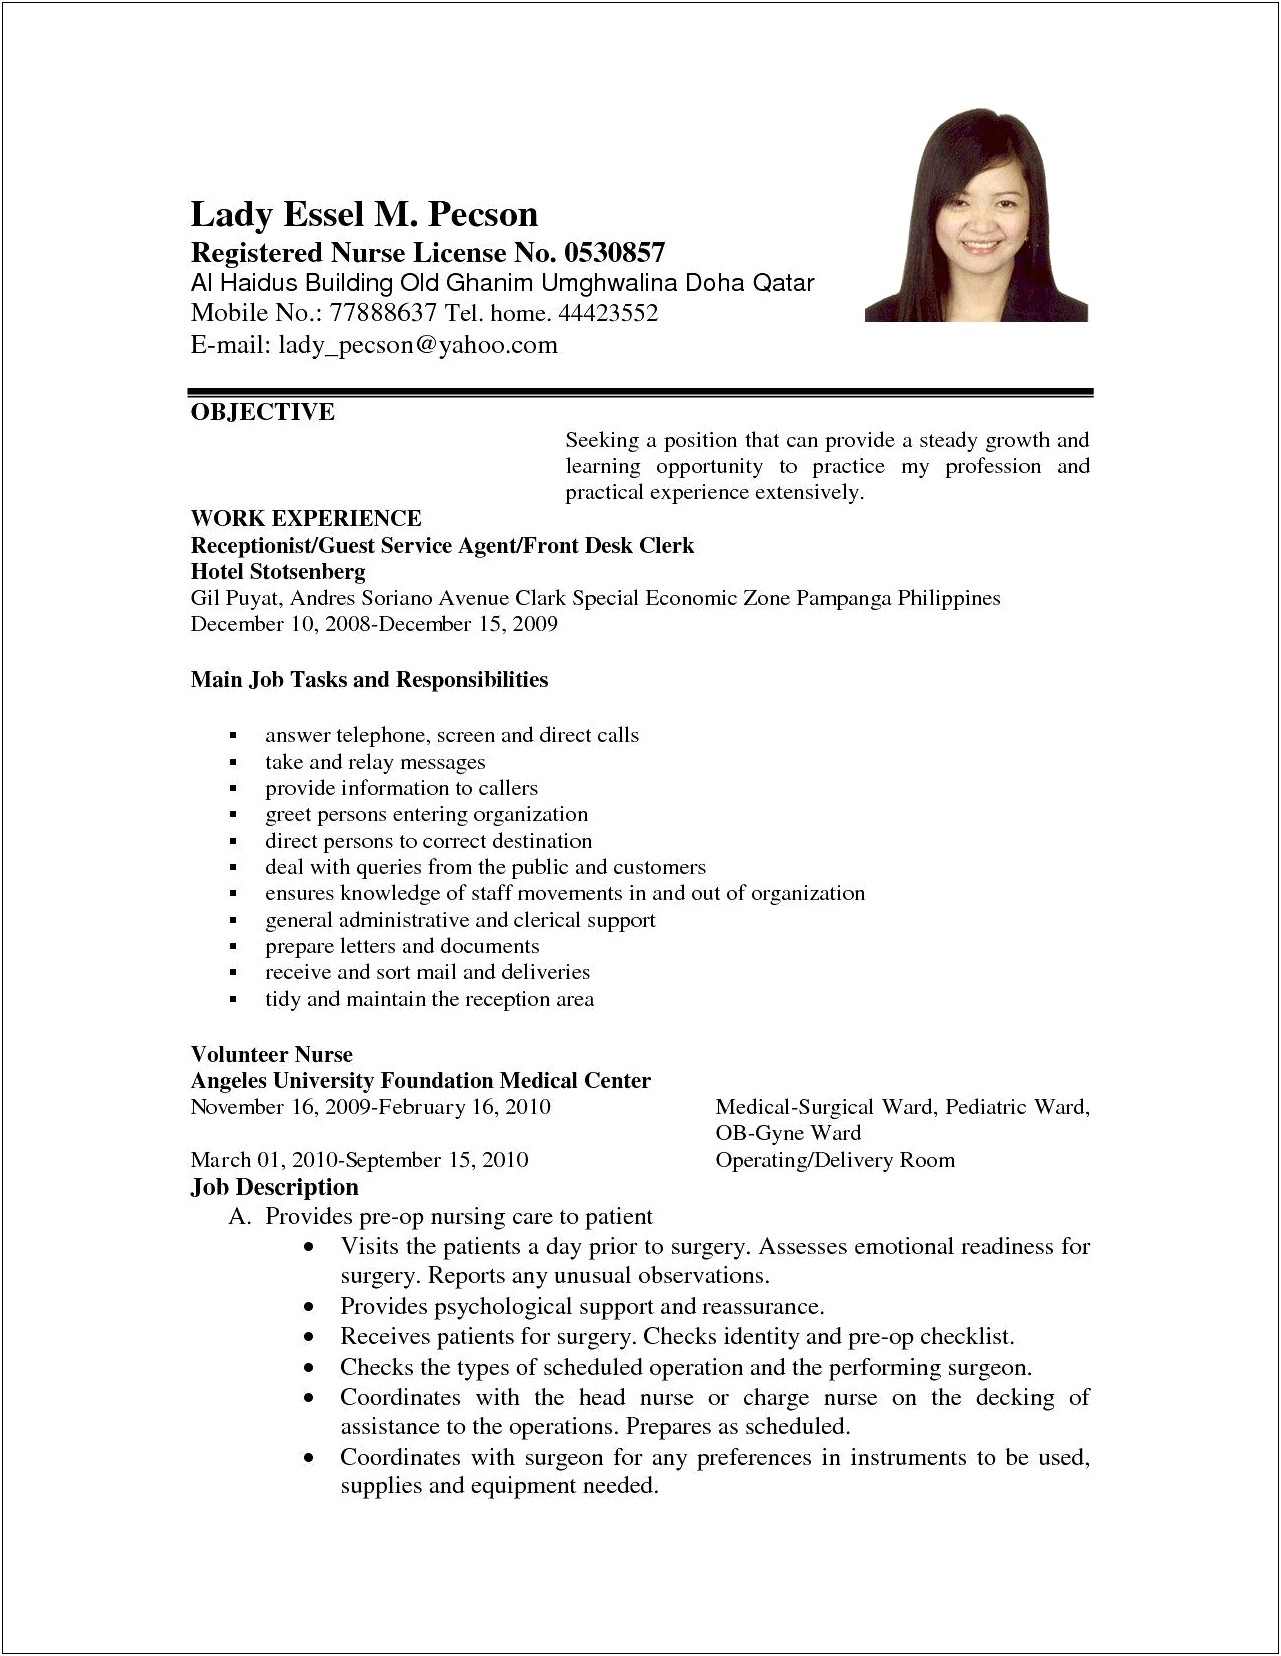 Resume Objectives That Work For Any Job